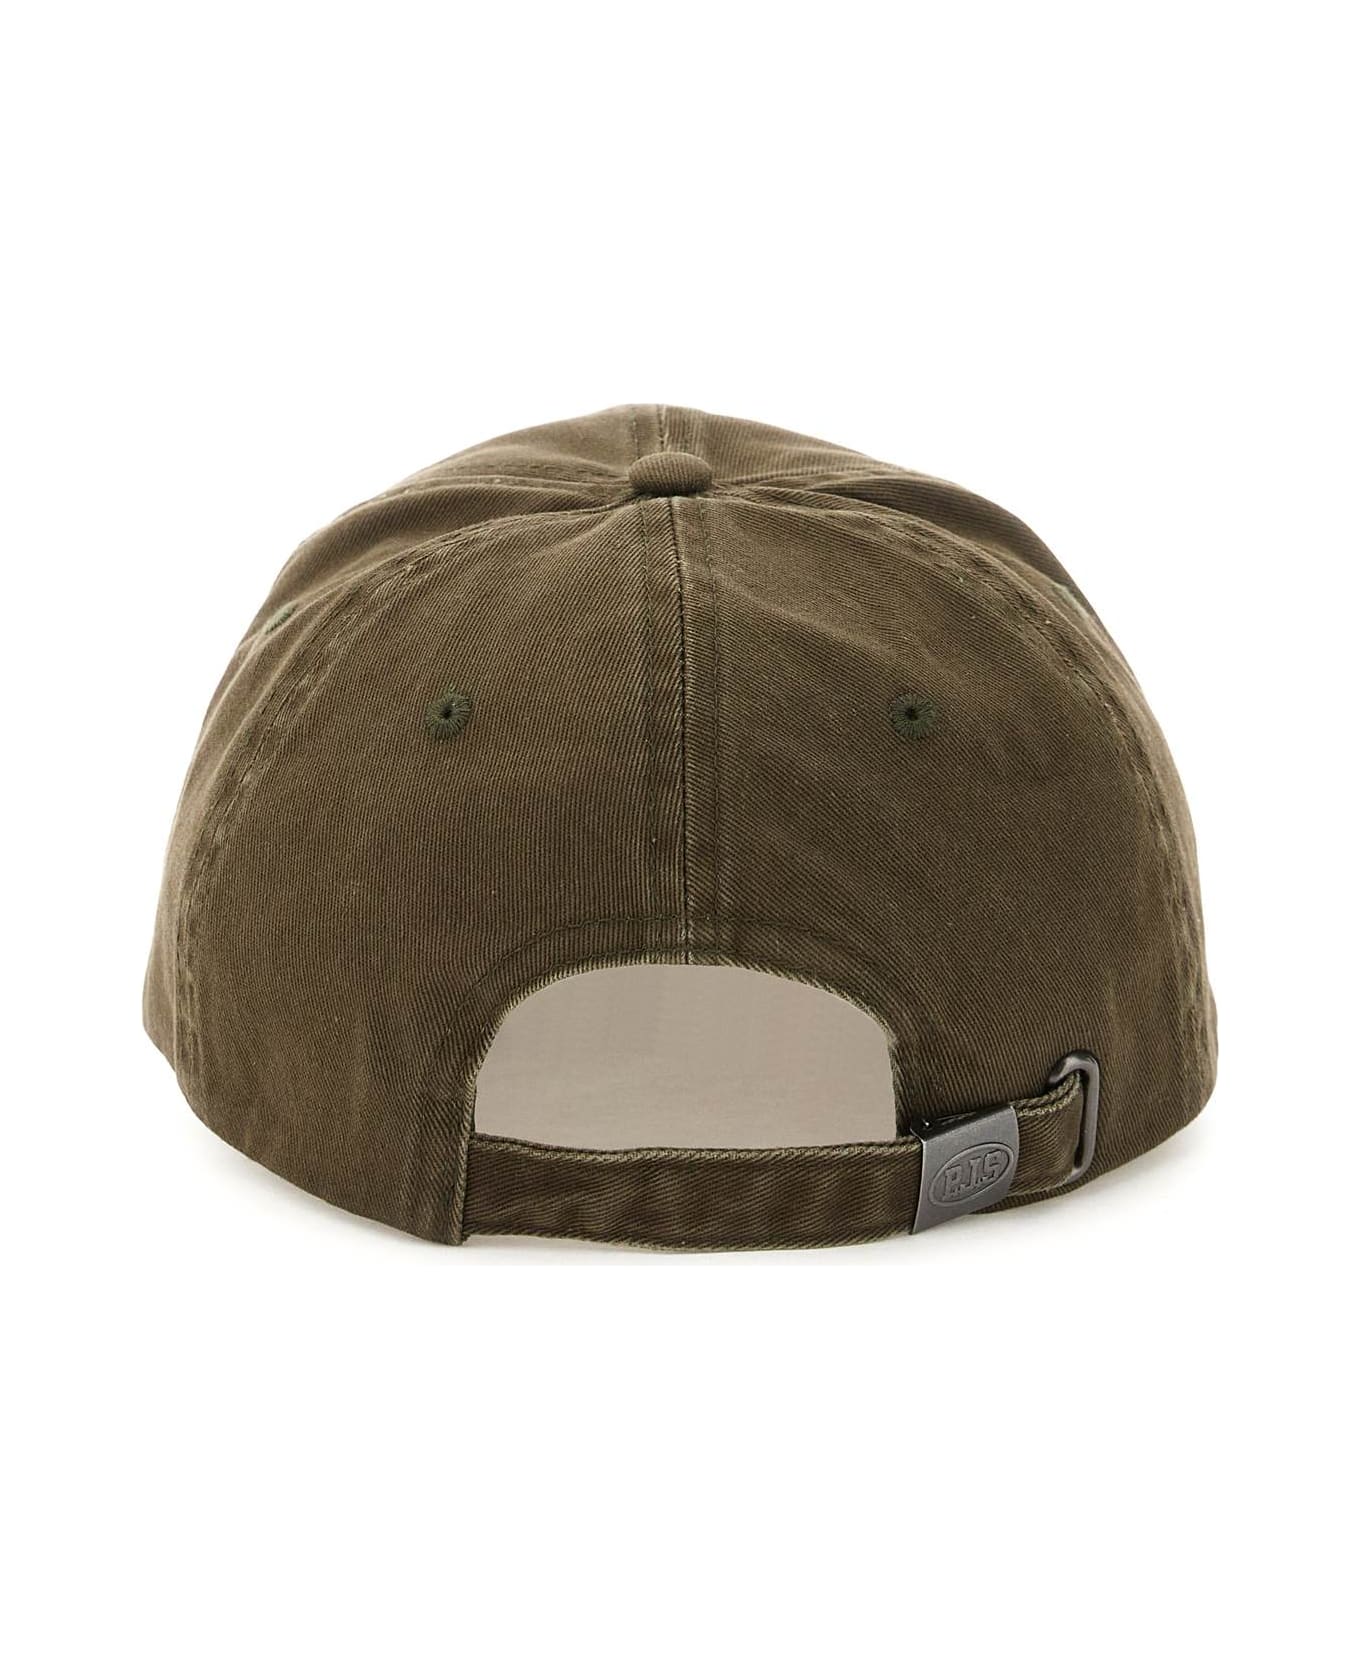 Parajumpers Baseball Cap With Embroidery - SURPLUS GREEN (Green) コート